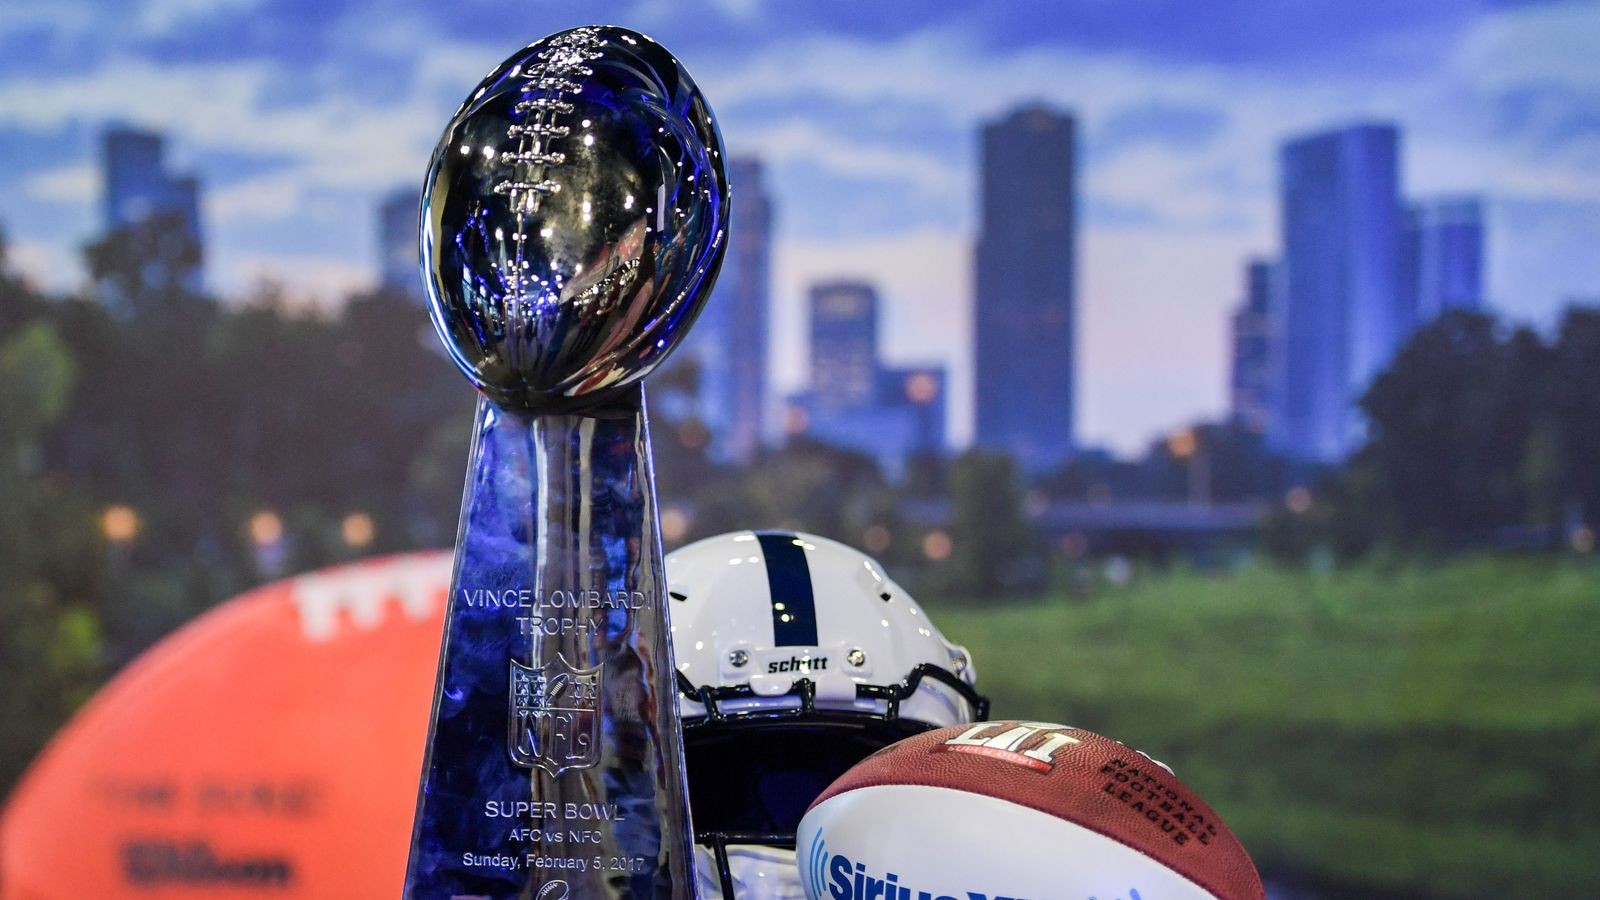 Super Bowl LI: Schedule, Kickoff Time, TV Channel, Radio, And Online Streaming